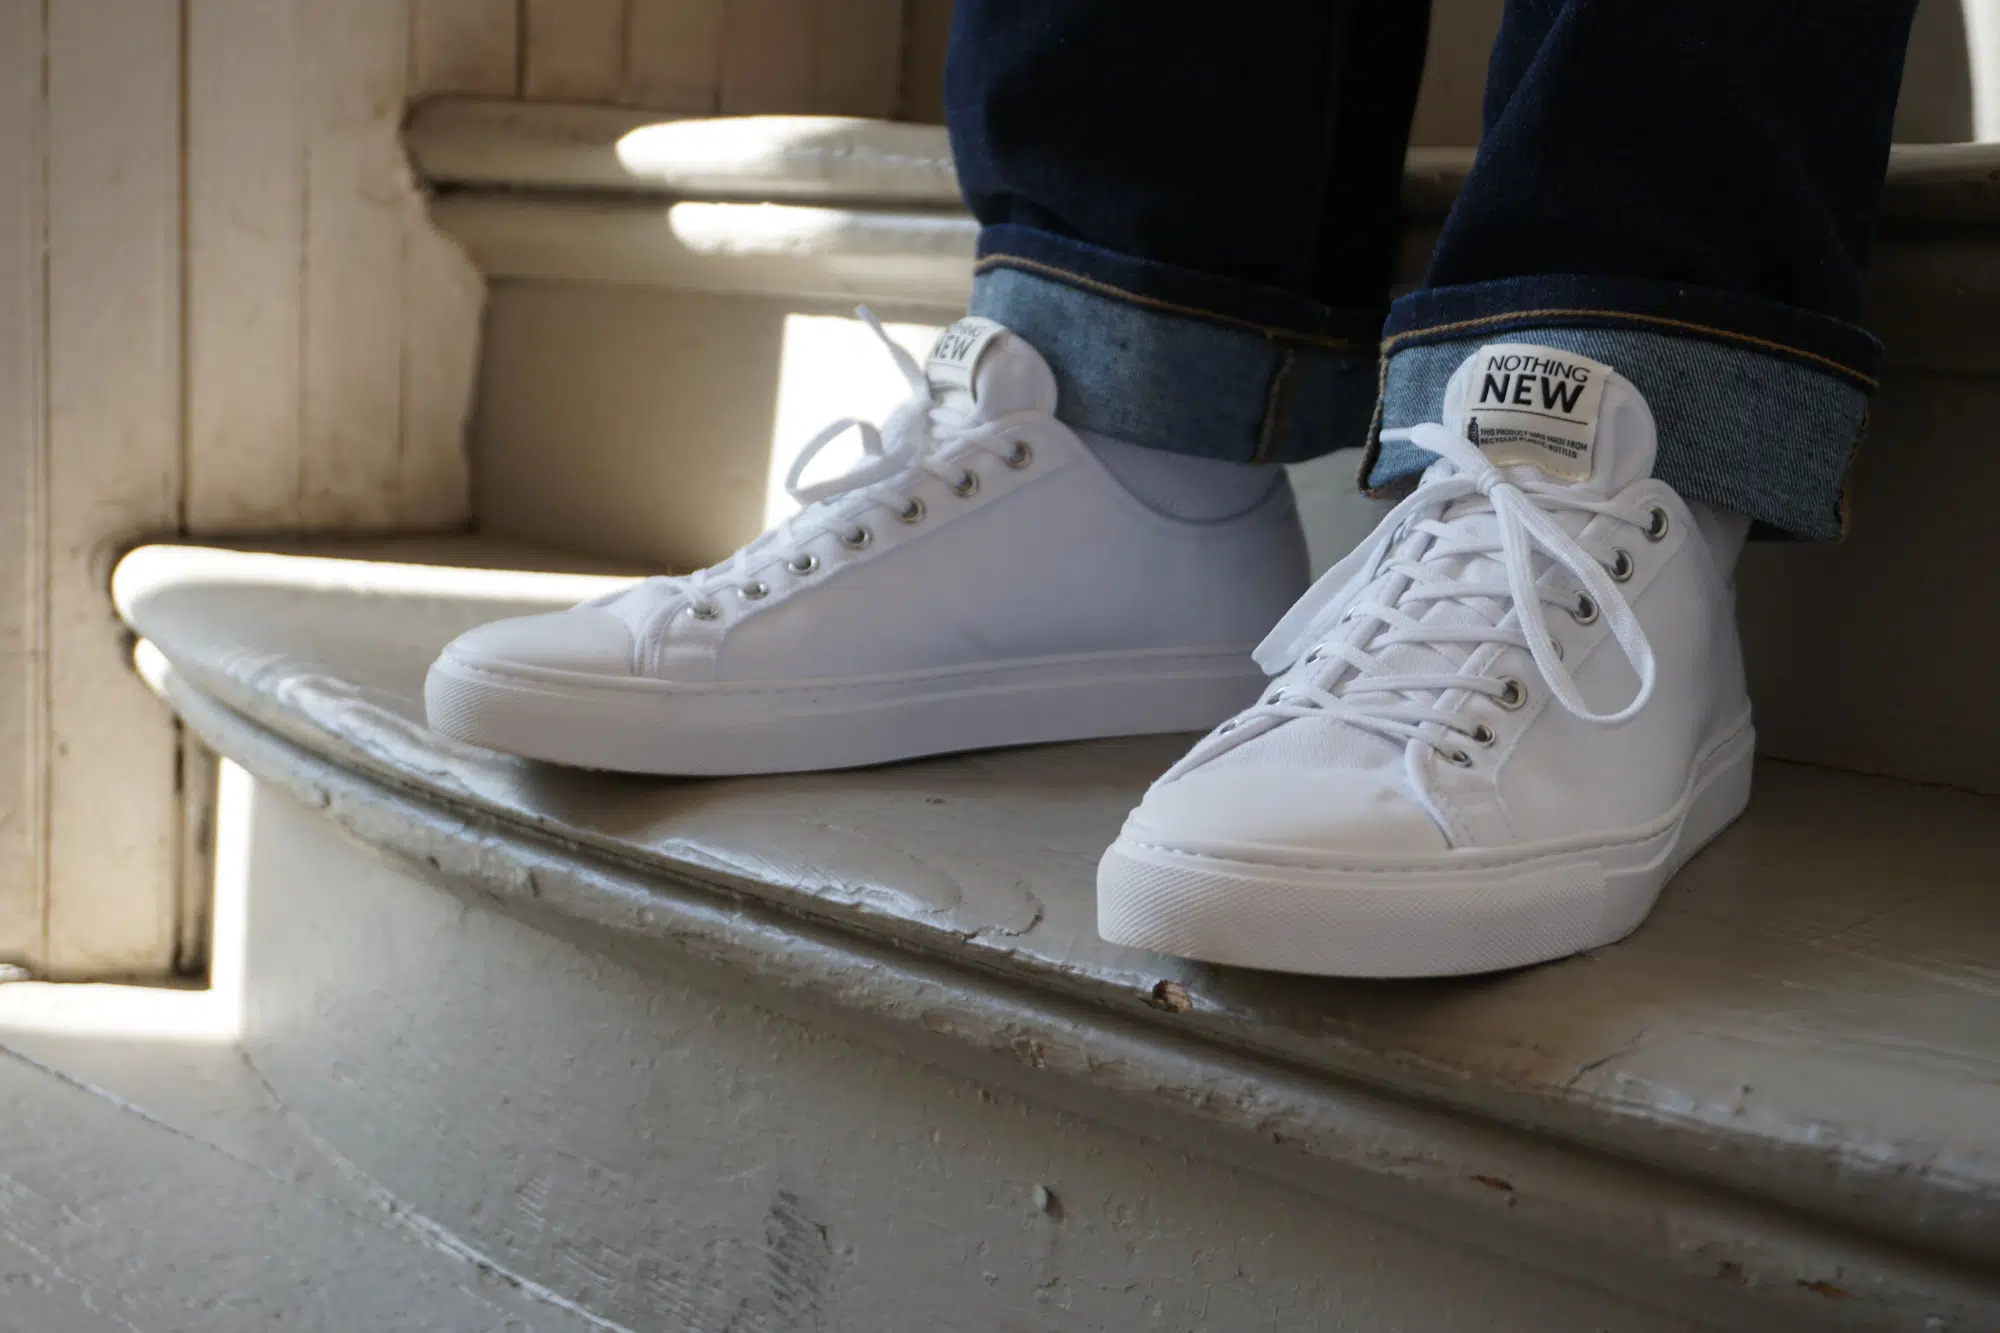 Nothing New white low top